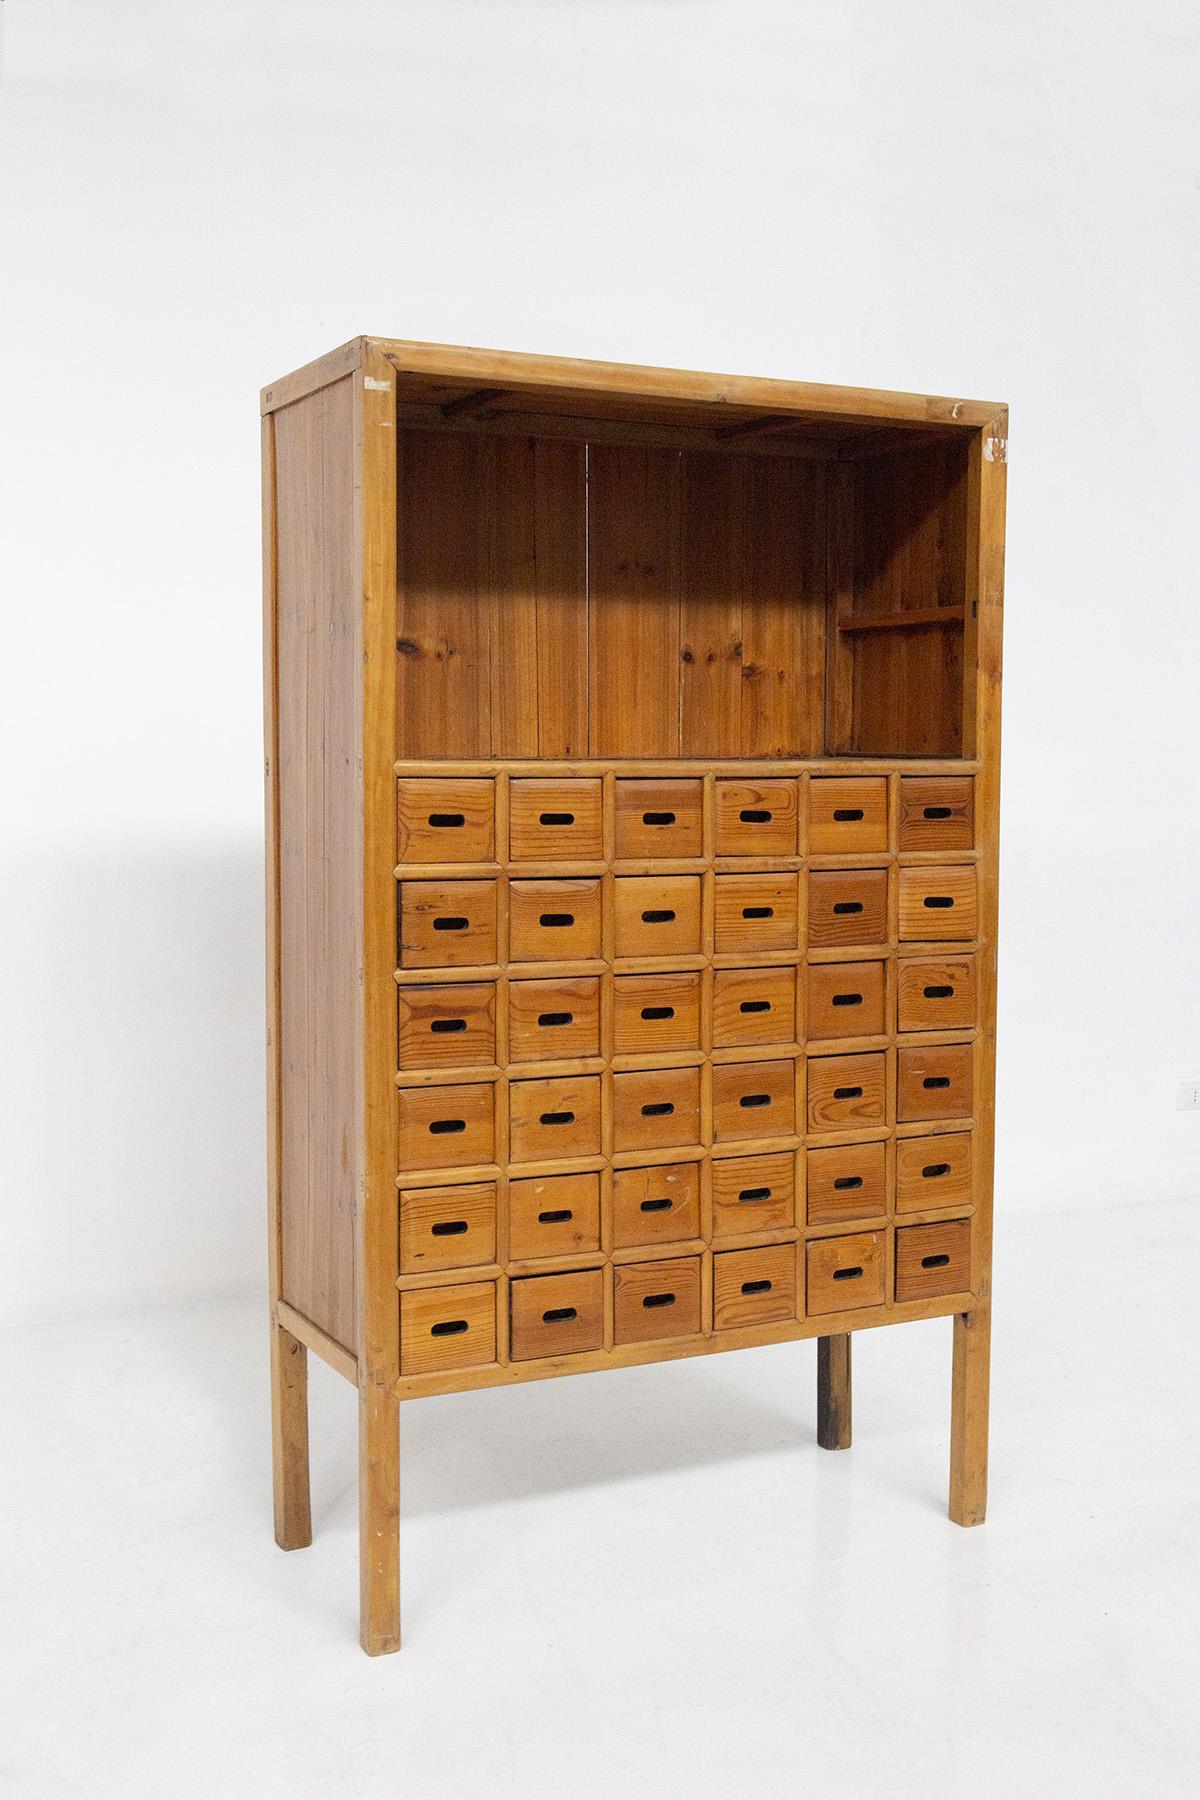 Italian storage cabinet from the early 1900s. The cabinet is made of larch wood, excellent workmanship and processing and technique of wood. The cabinet features a series of many industrial-style drawers where various objects can be stored. Each